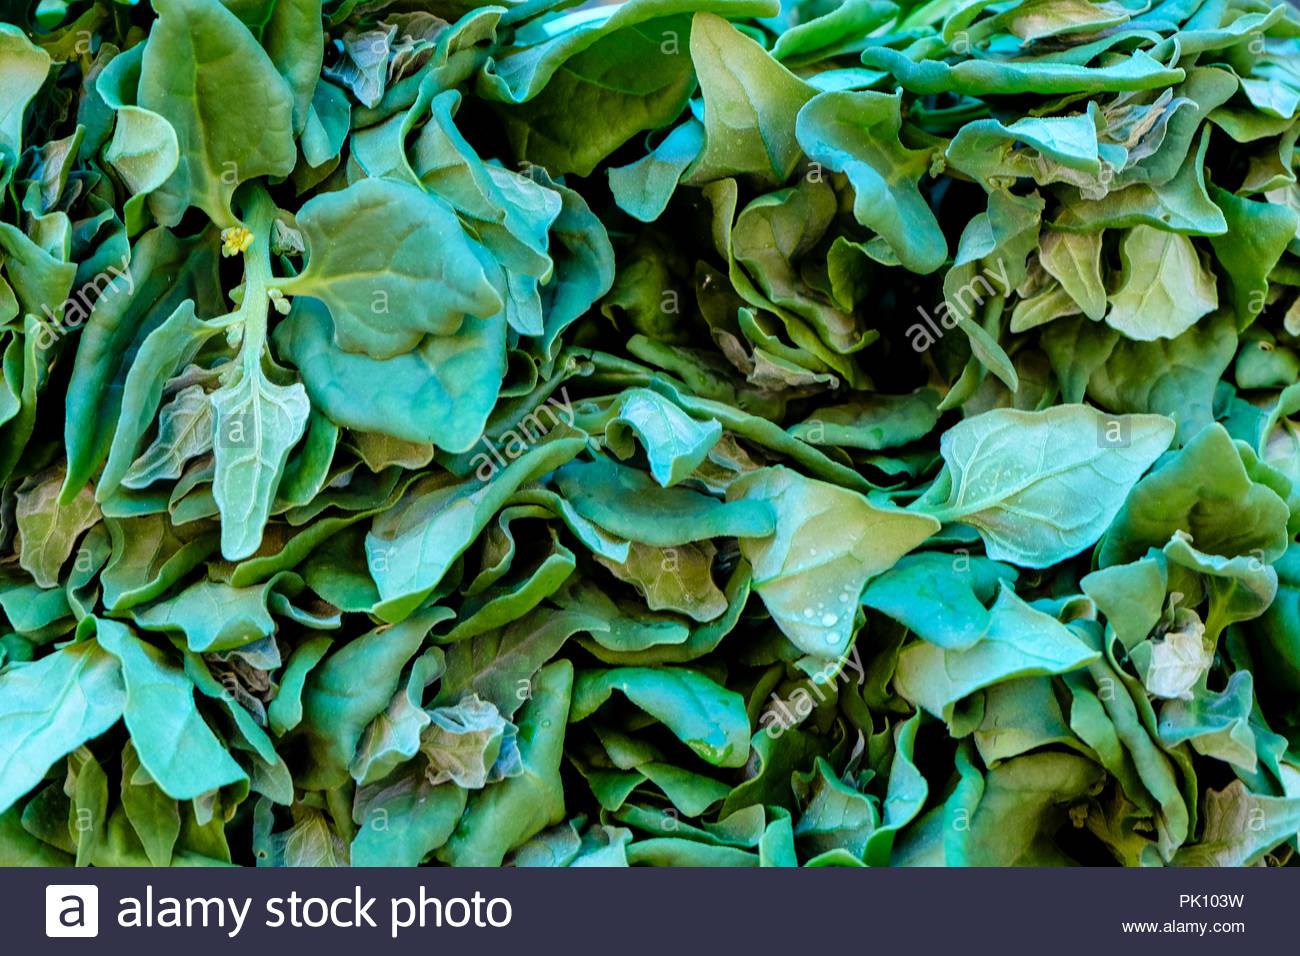 Spinach Background Full Image Top Stock Photo